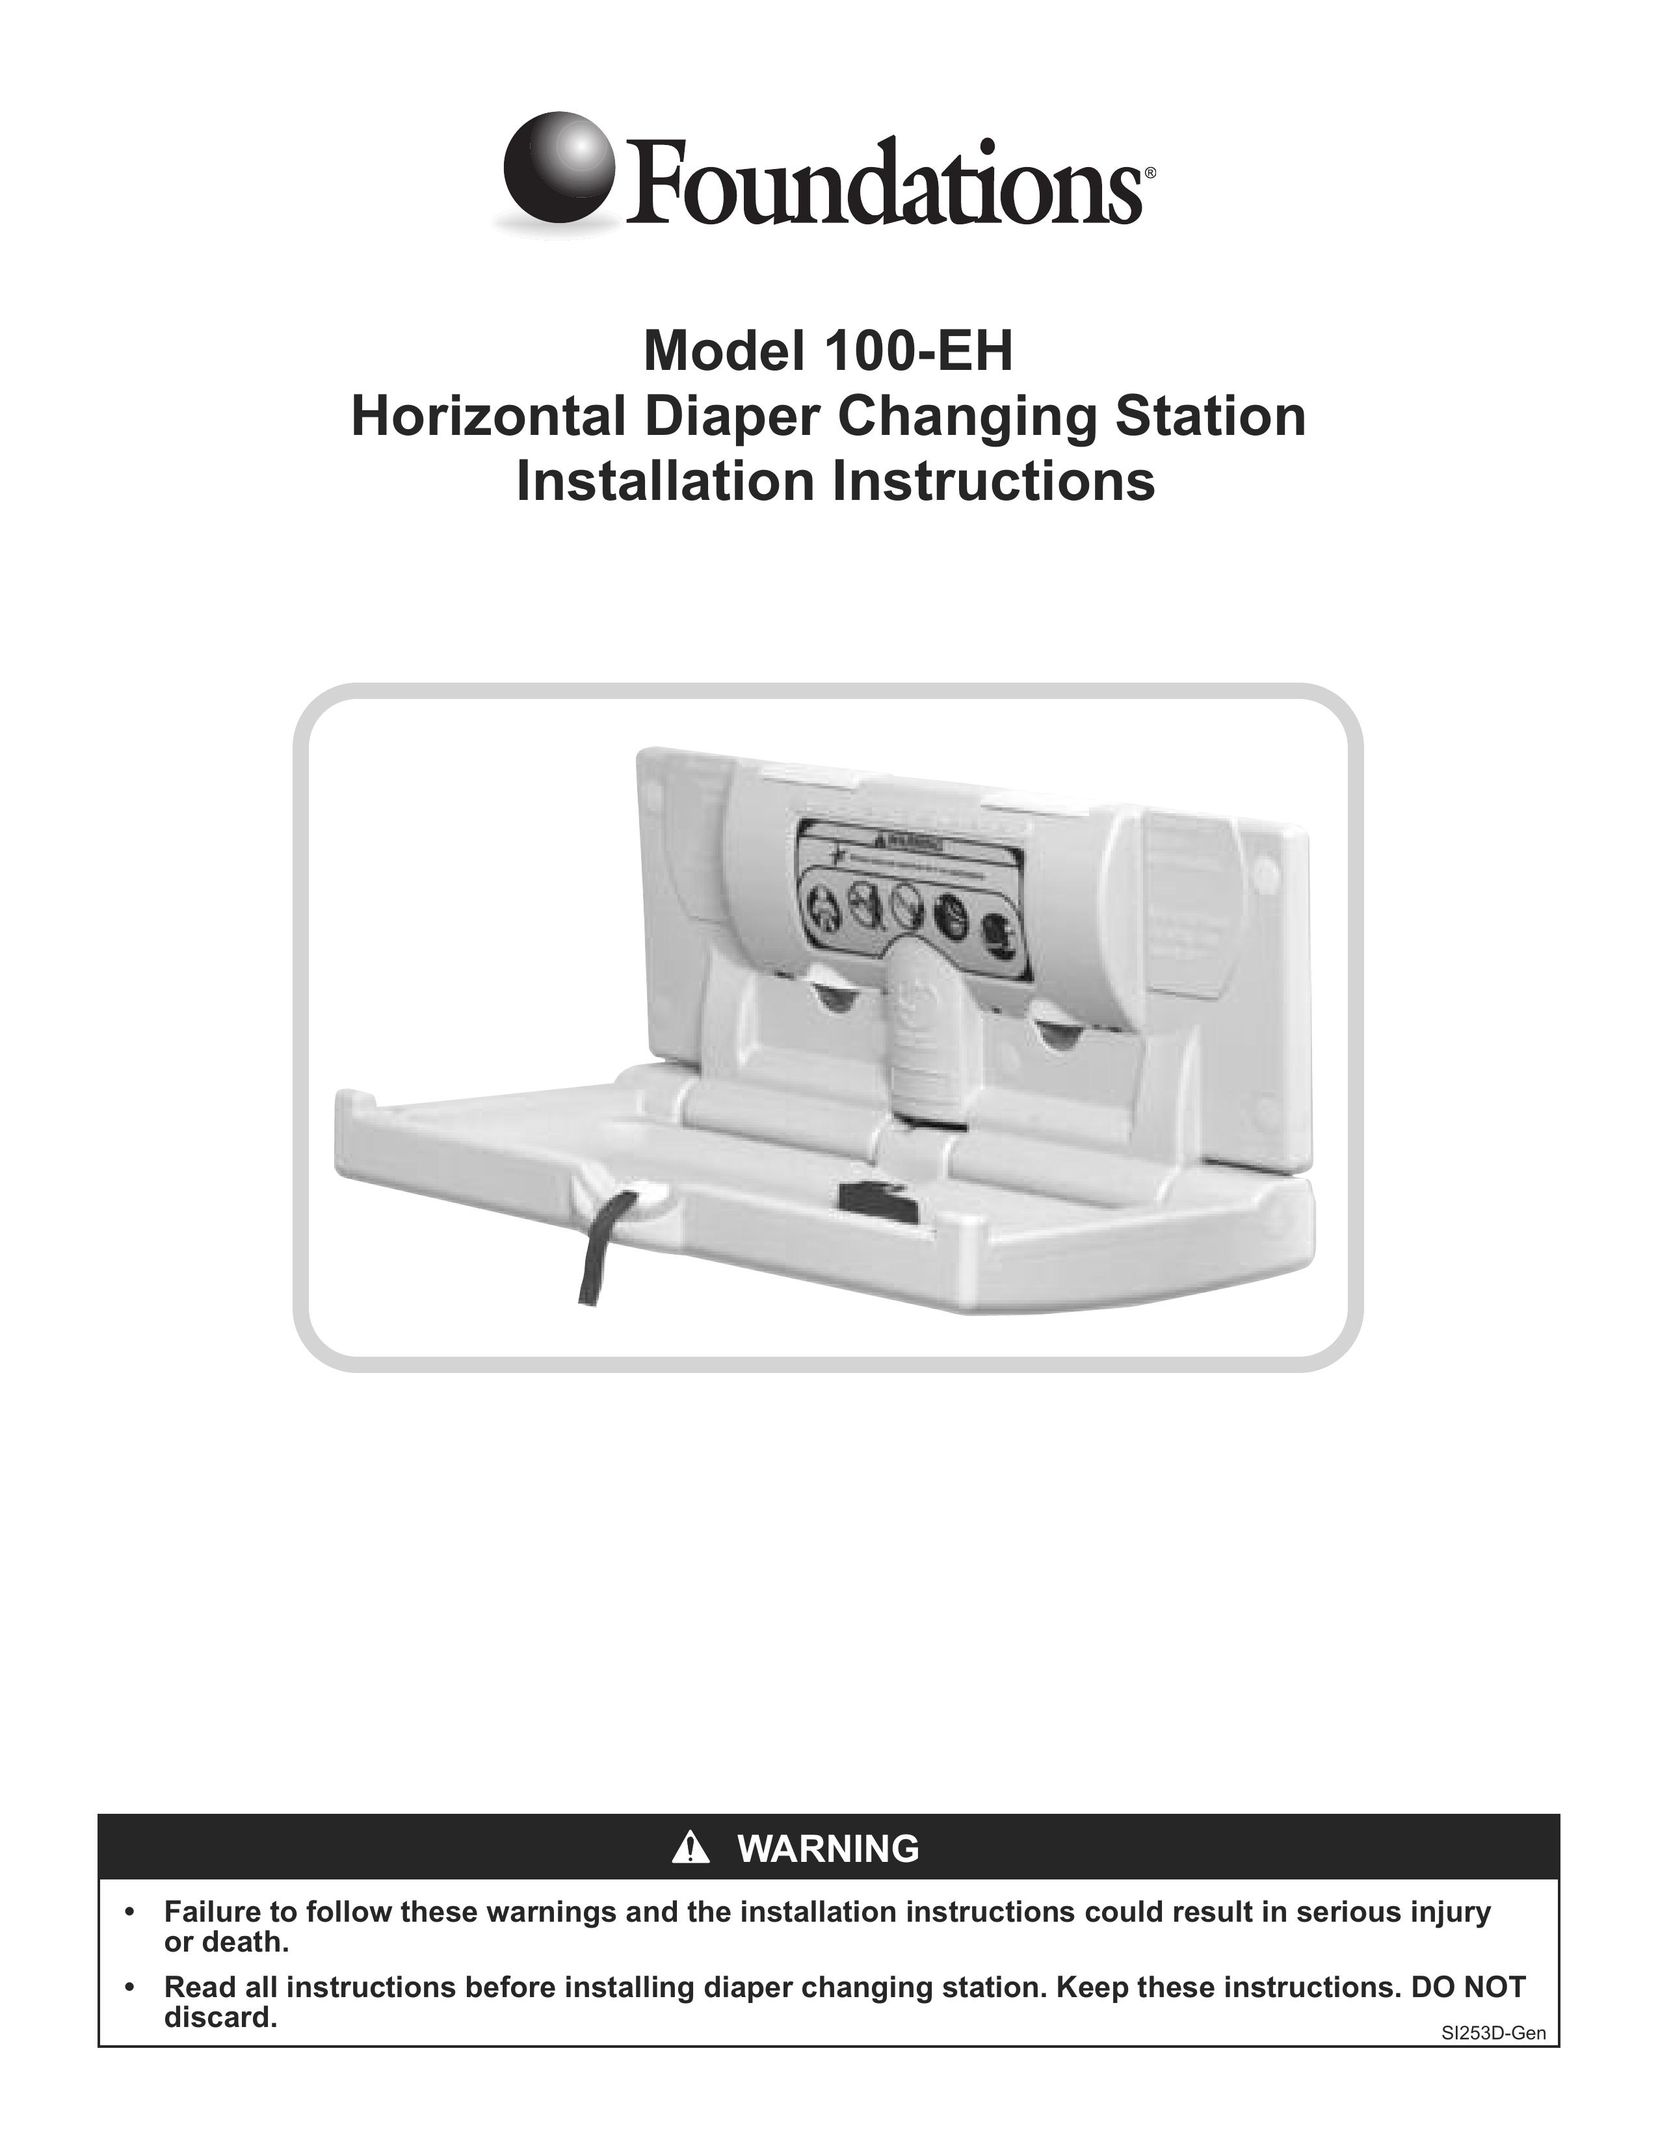 Foundations 100-EH Baby Furniture User Manual (Page 1)